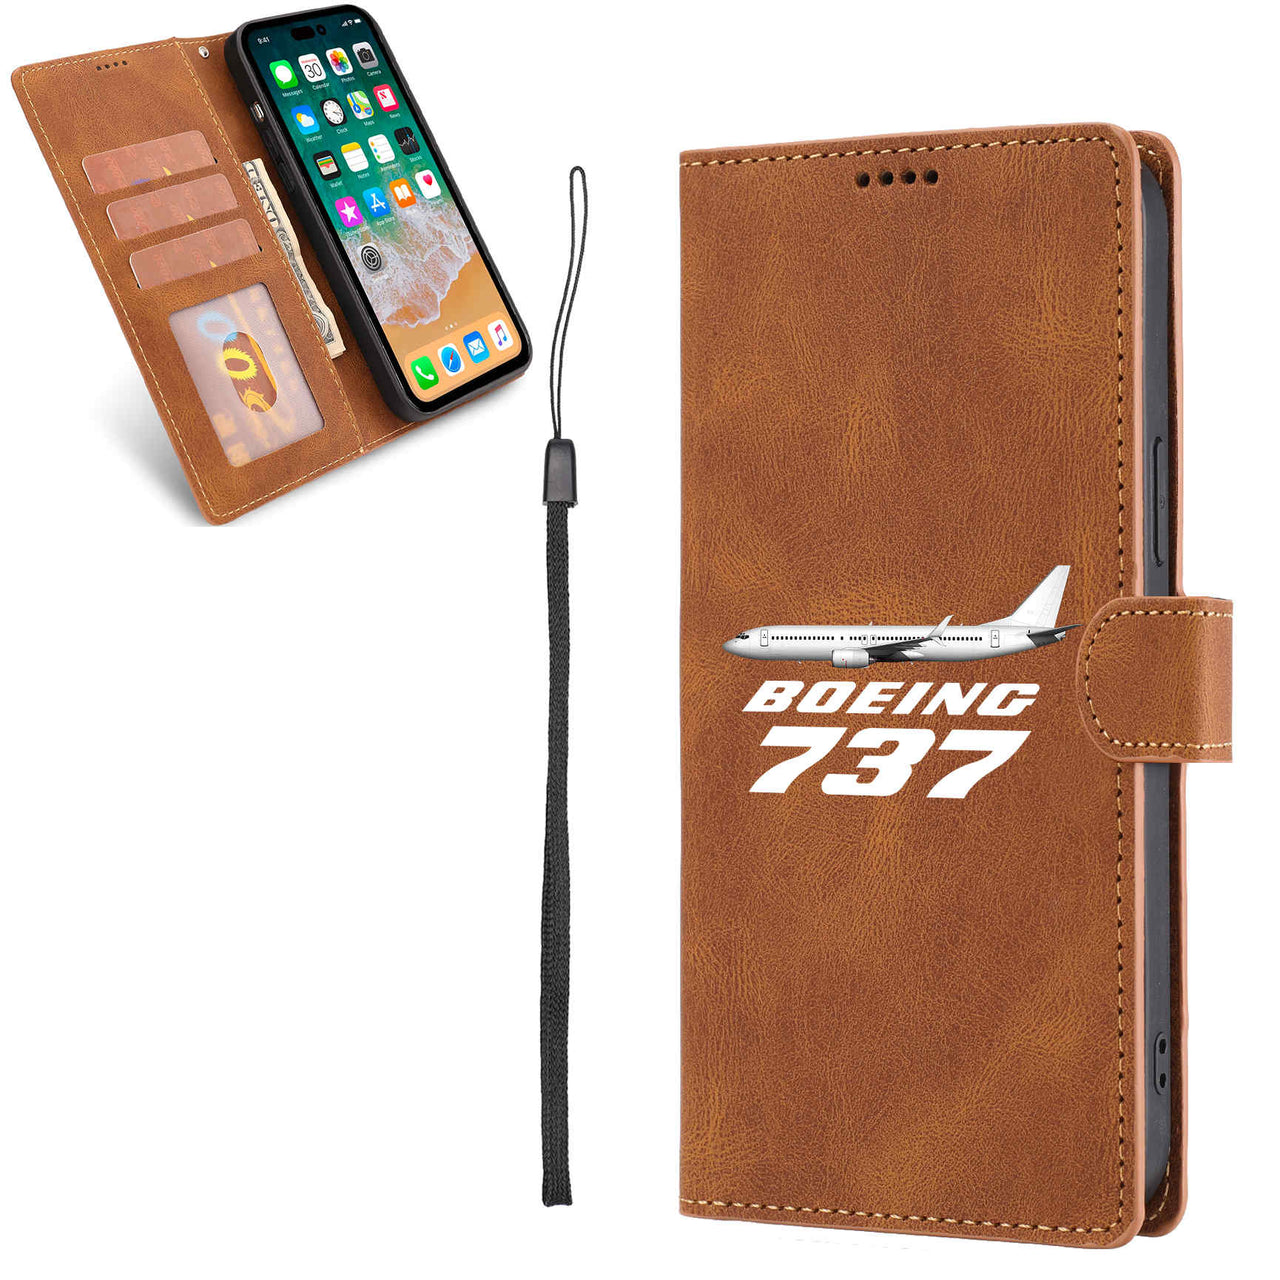 The Boeing 737 Designed Leather Samsung S & Note Cases